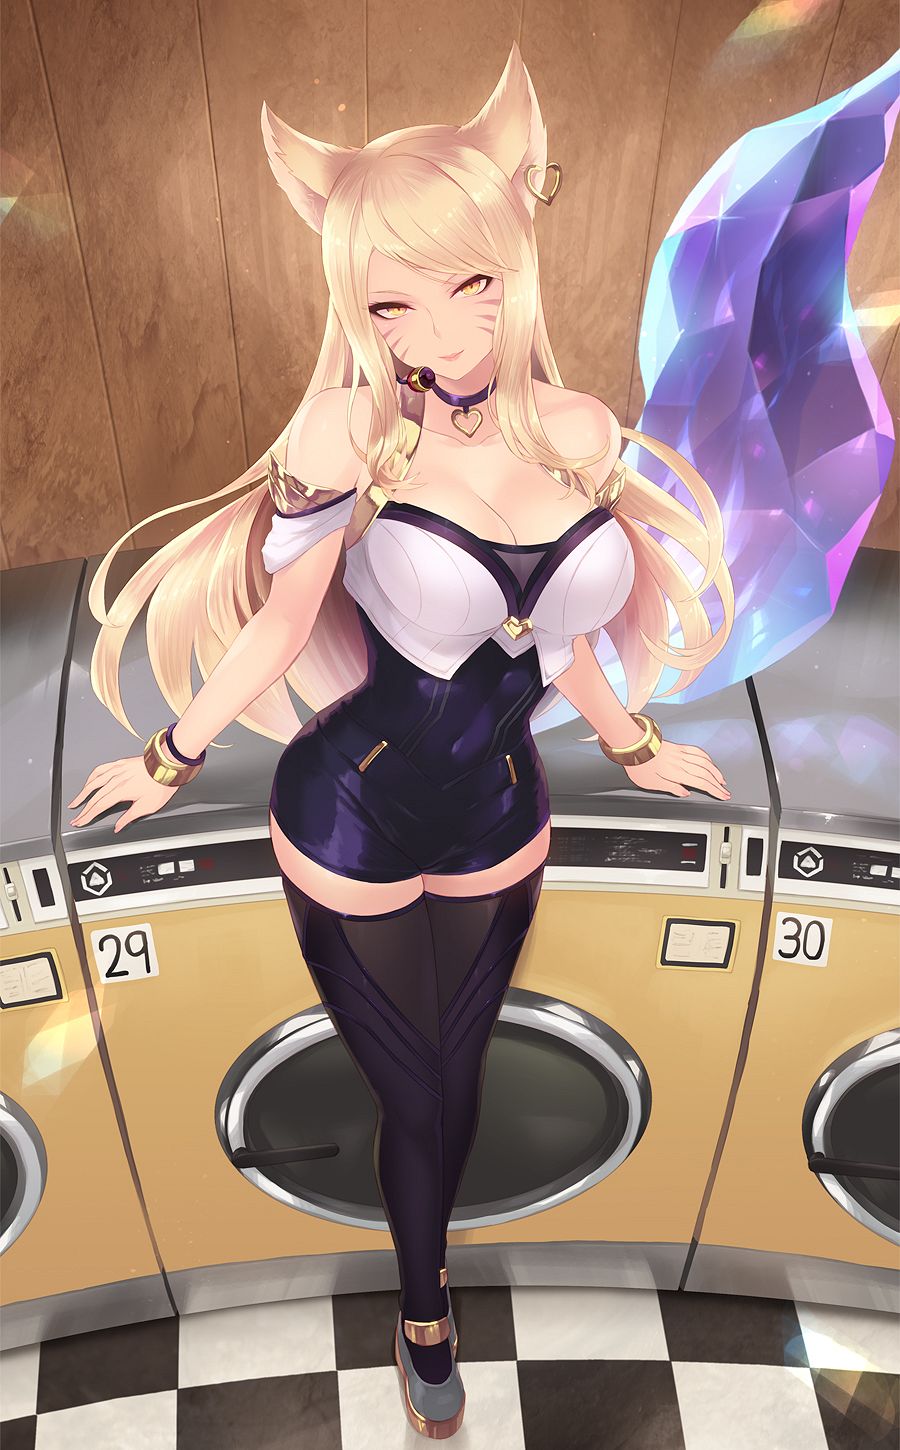 Cute fox KDA Ahri and washers (Riot game skin): League of Legends (Artist: Cait)